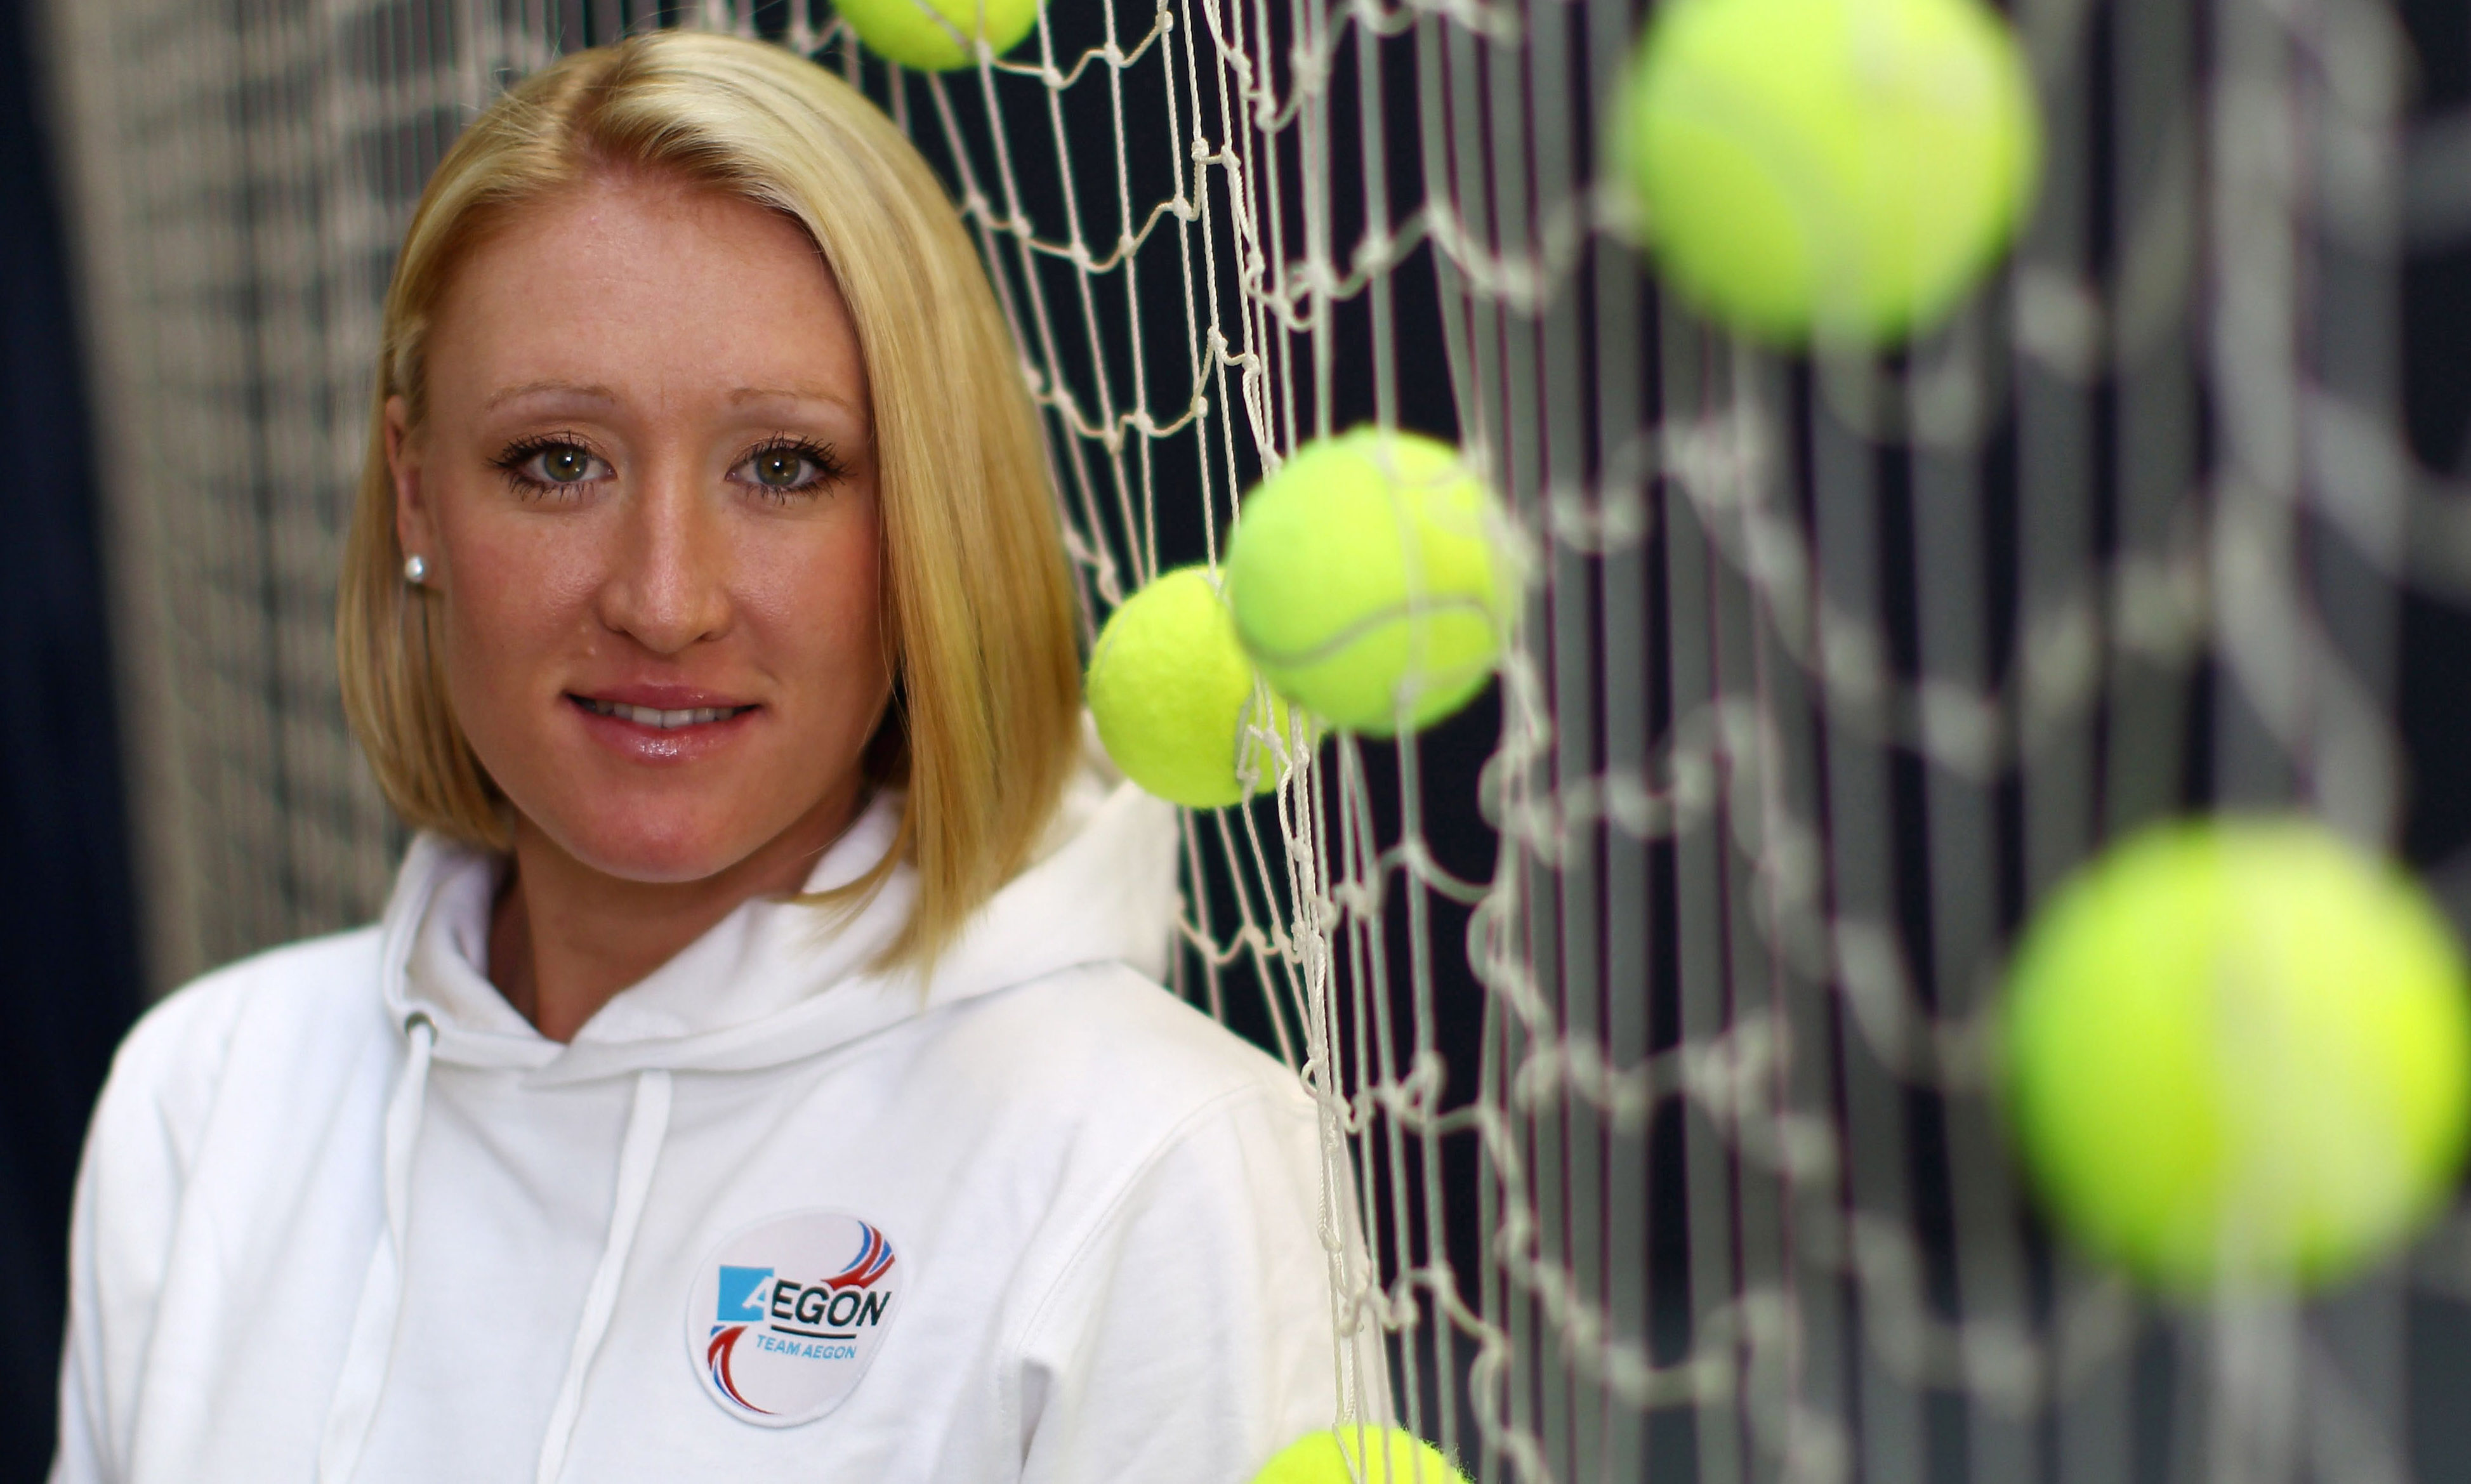 (FILE PHOTO) ROEHAMPTON, ENGLAND - NOVEMBER 29: (EDITORS NOTE: IMAGE HAS BEEN DIGITALLY RETOUCHED) Elena Baltacha of Great Britain poses for the camera at the National Tennis Centre on November 29, 2010 in Roehampton, England. (Photo by Julian Finney/Getty Images for AEGON)